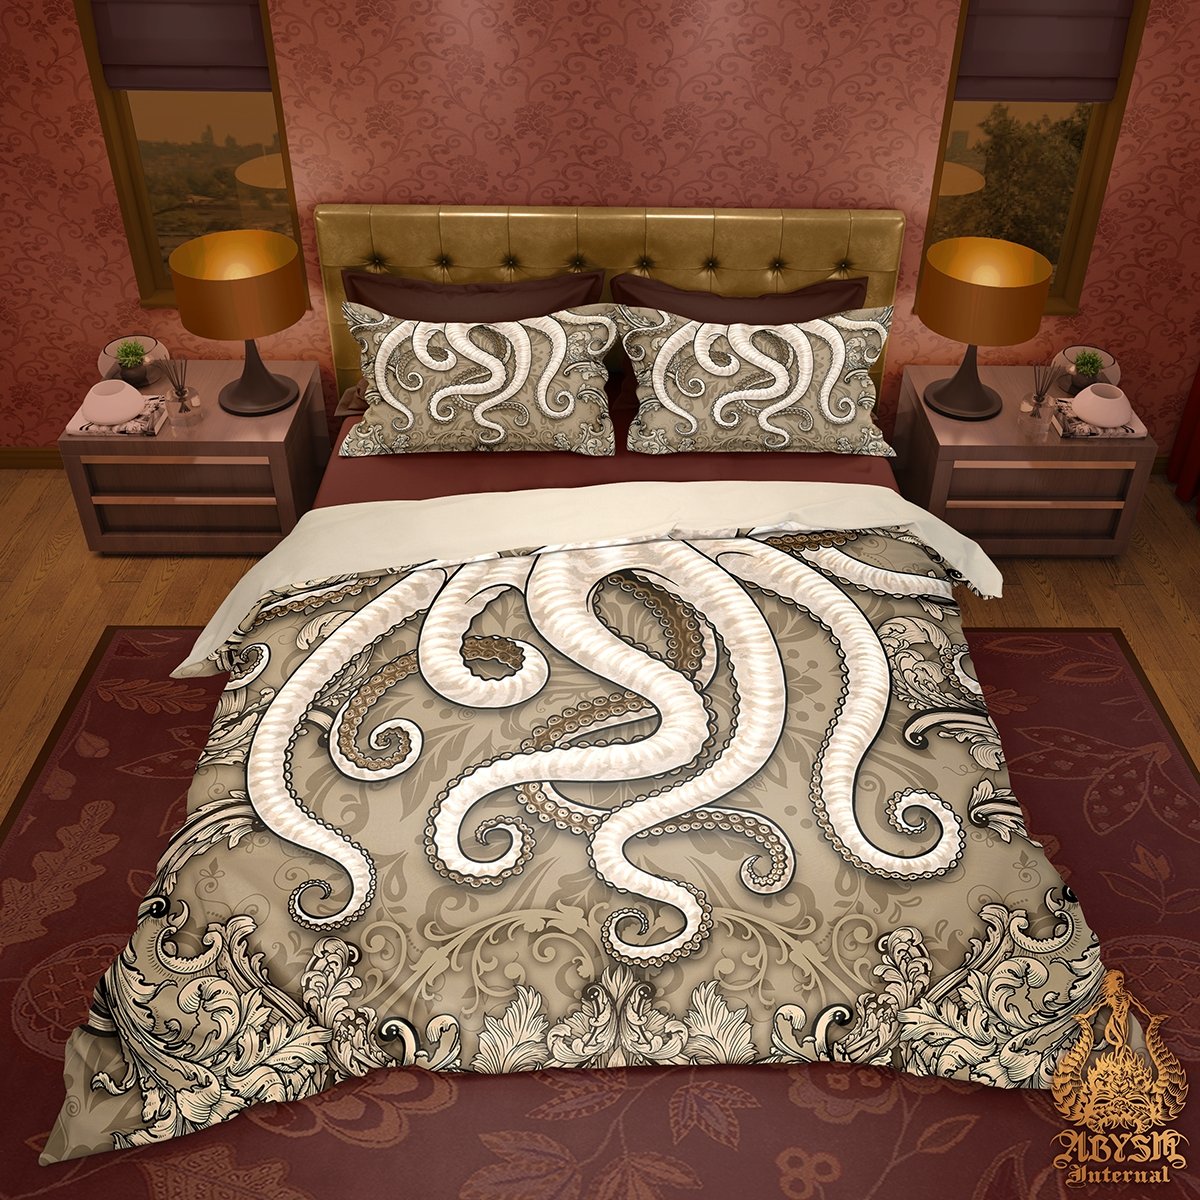 Octopus Bedding Set, Comforter and Duvet, Beach Bed Cover, Coastal Bedroom Decor, King, Queen and Twin Size - Cream - Abysm Internal